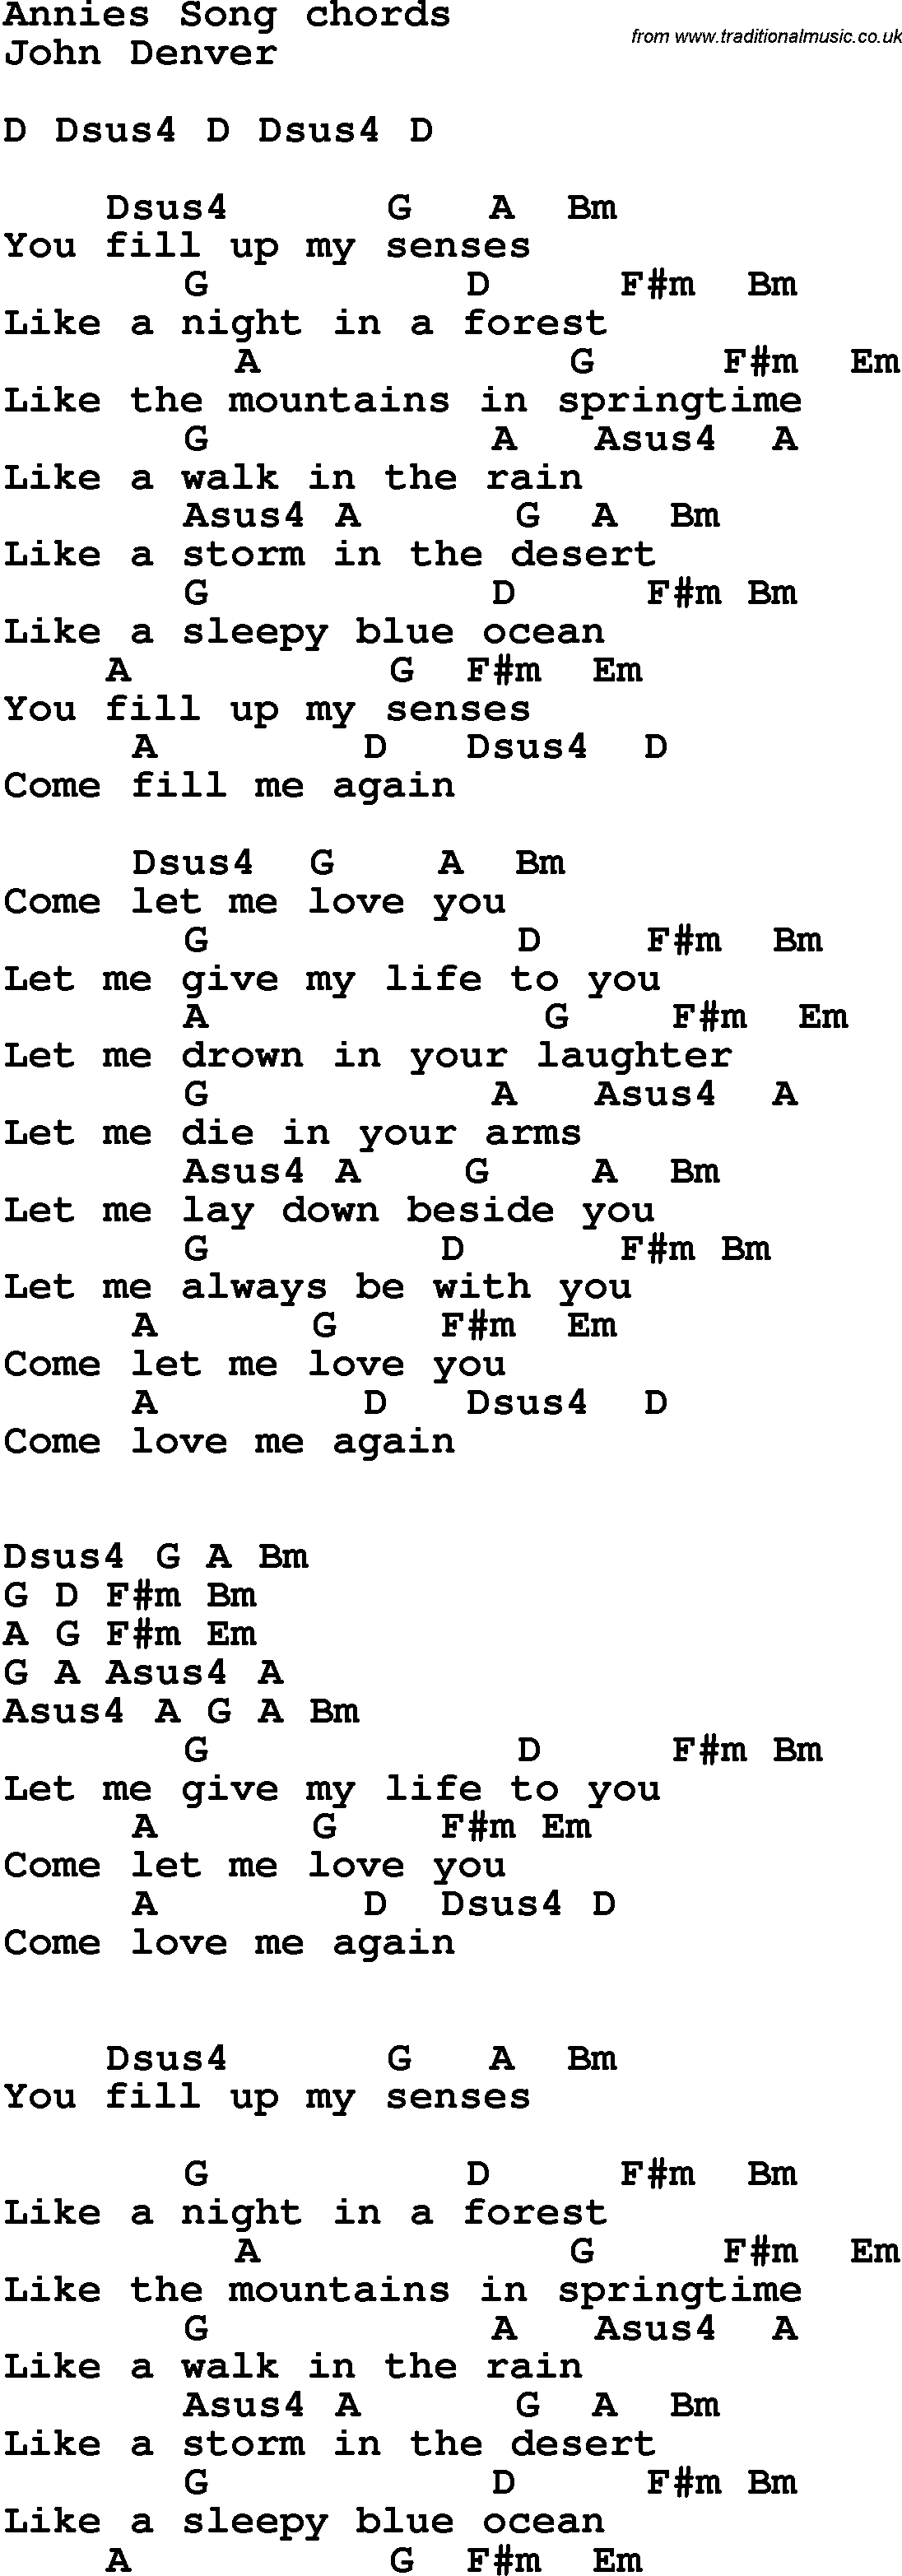 Song Lyrics with guitar chords for Annie's Song - John Denver